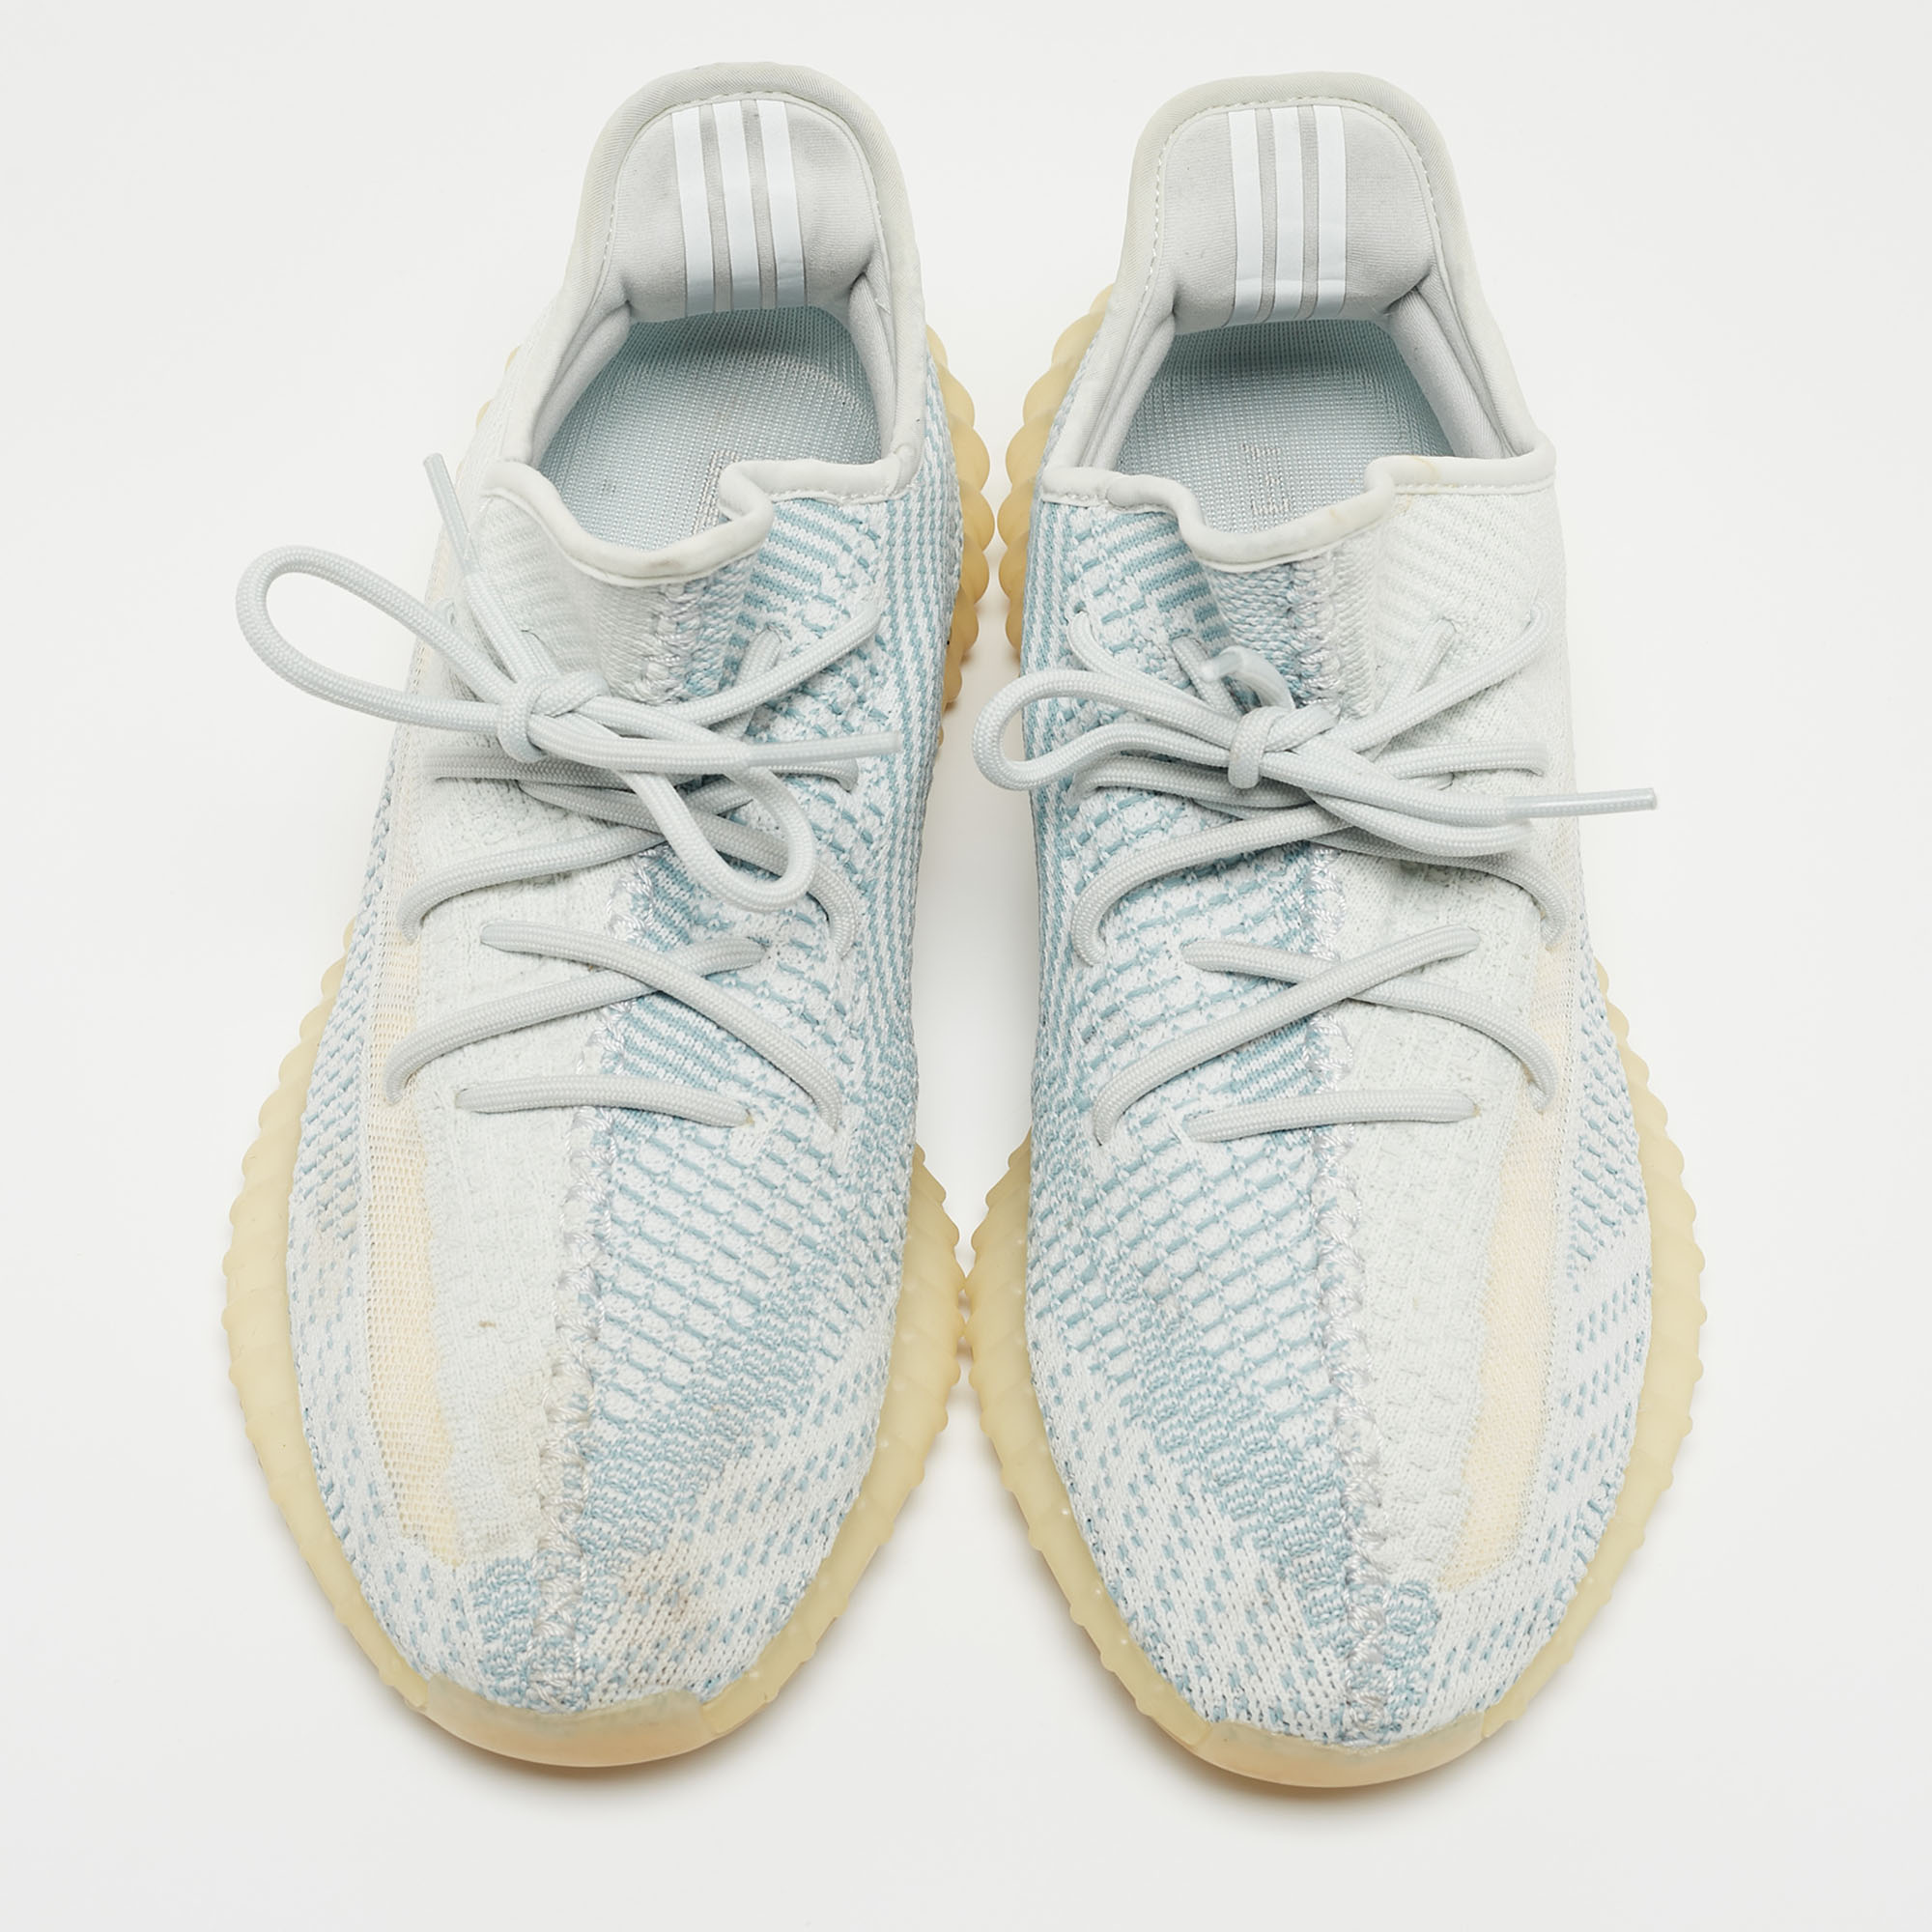 Yeezy X Adidas Blue/White Knit Fabric Boost 350 V2 Cloud White Non Reflective Sneakers Size 45 1/3